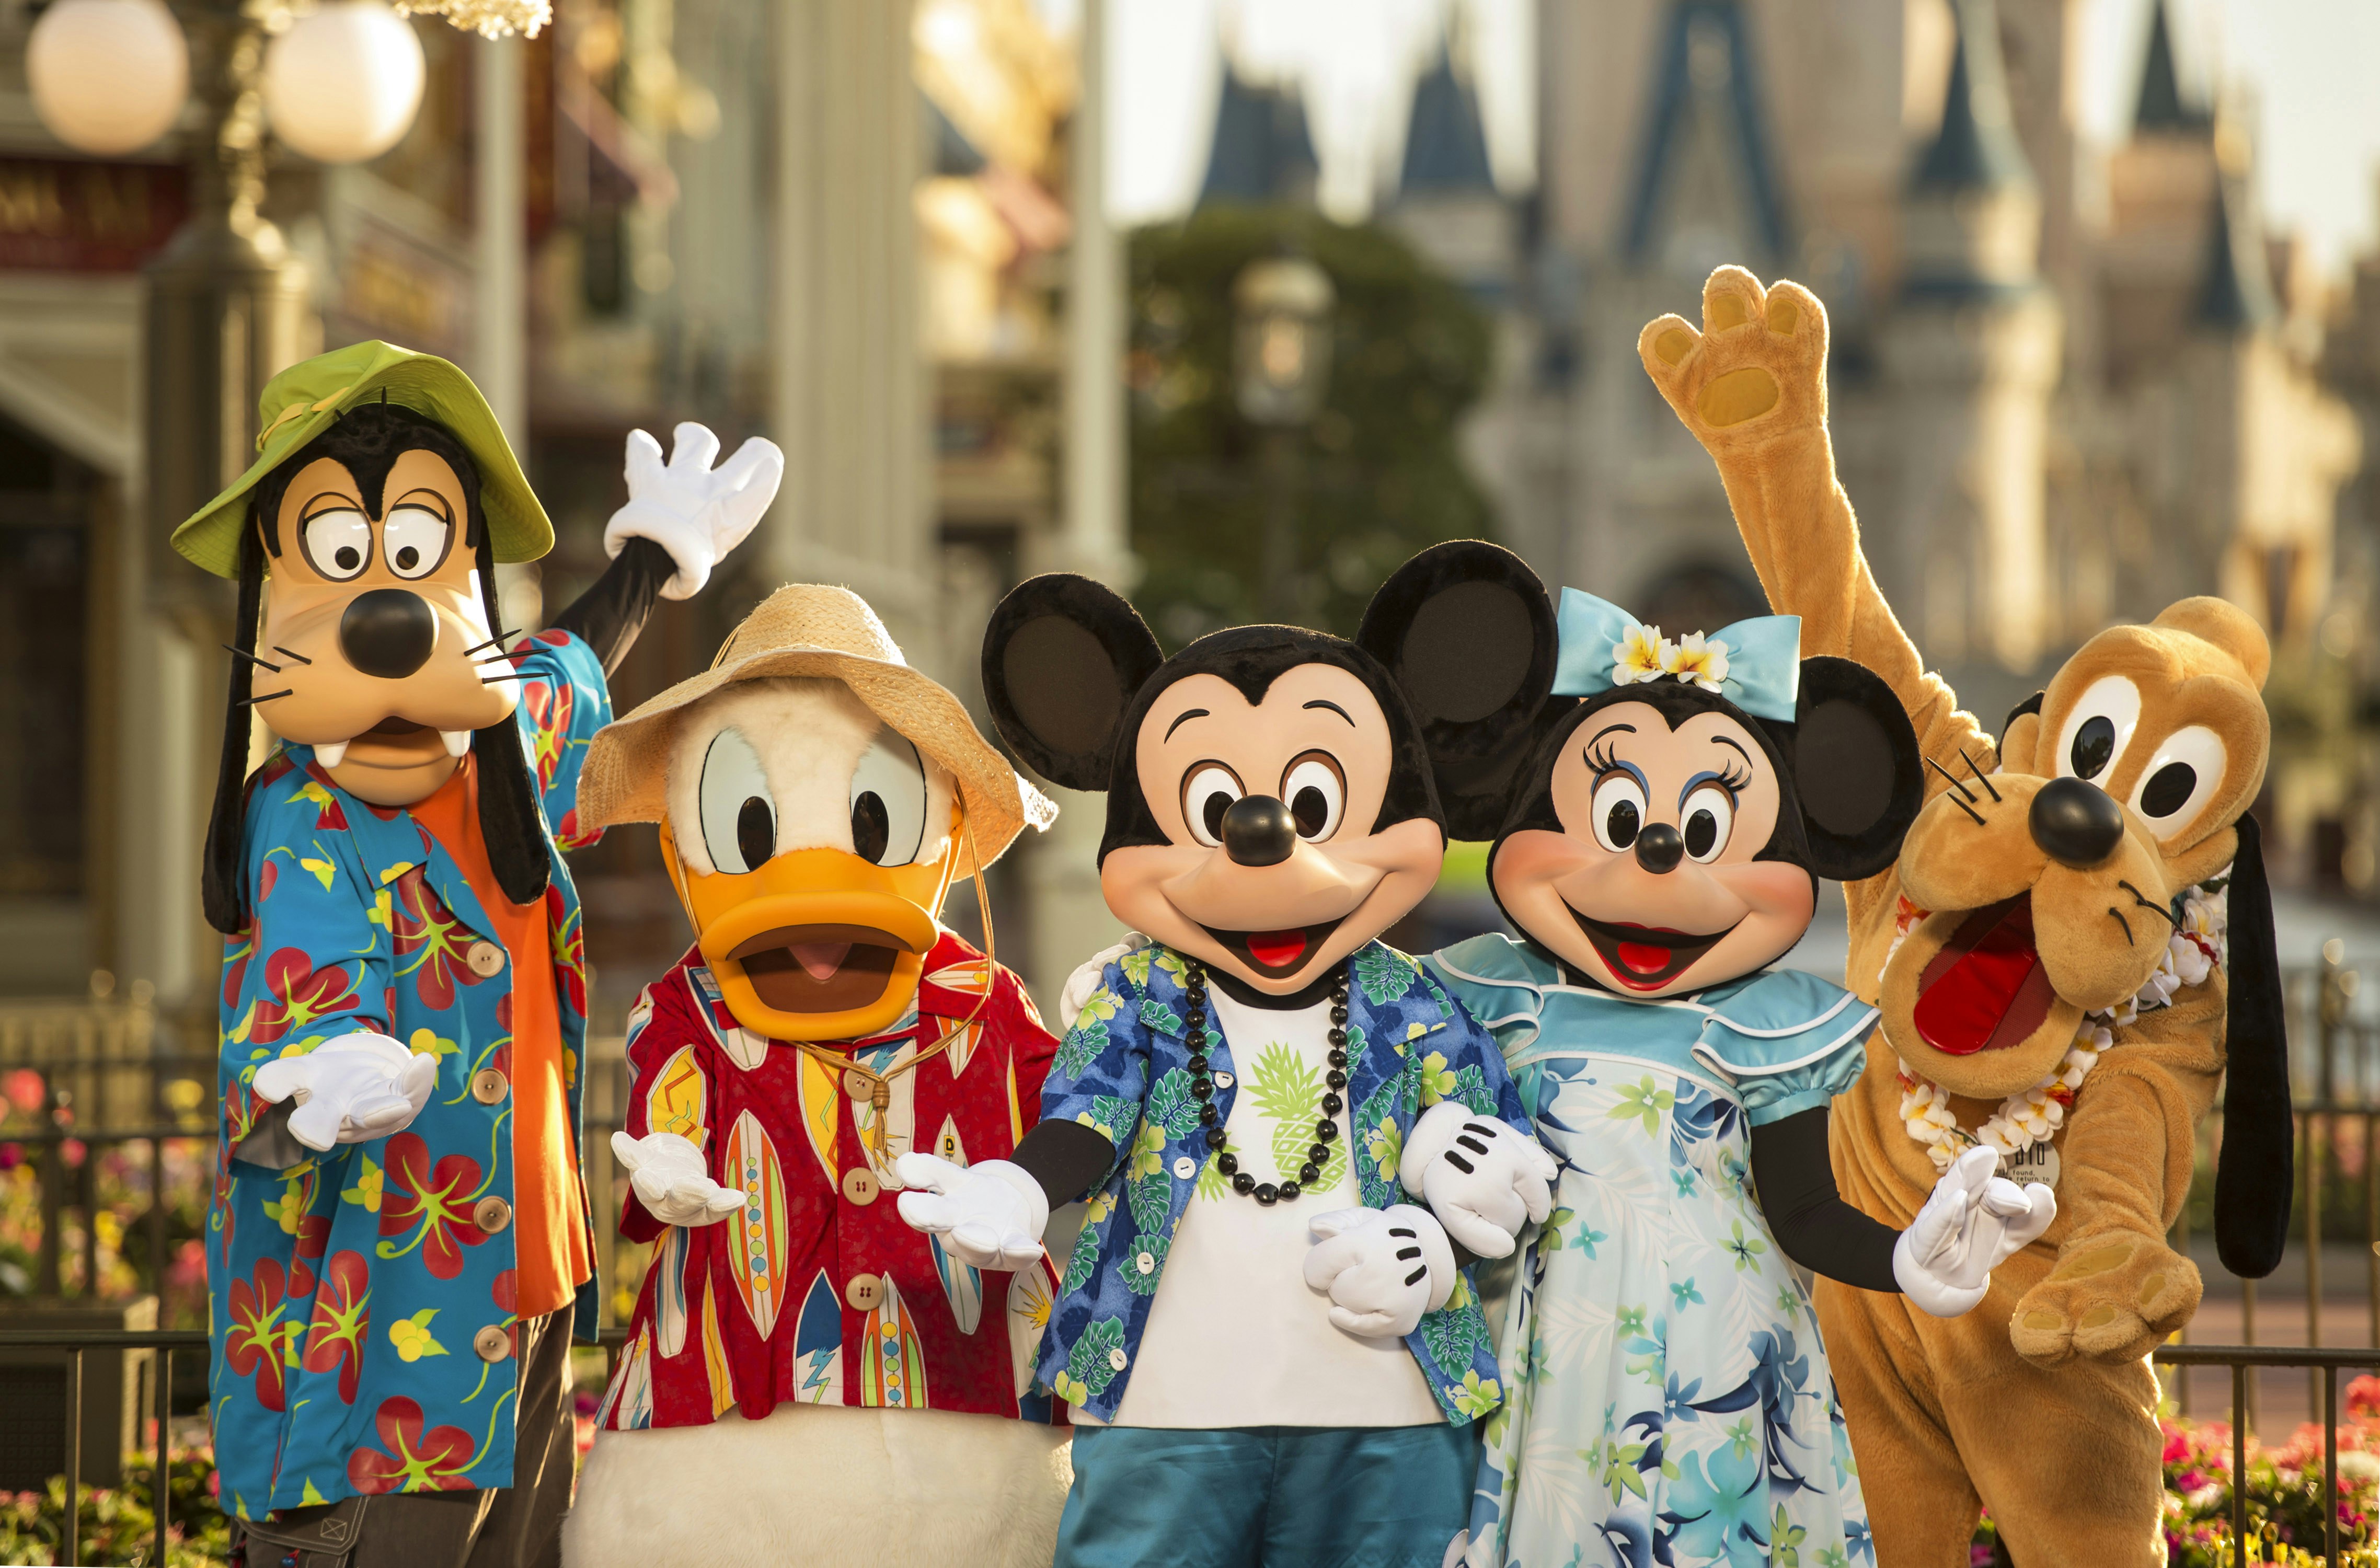 Costumed characters of Goofy, Donald Duck, Mickey Mouse, Minnie Mouse and Pluto stand together at a Disney park